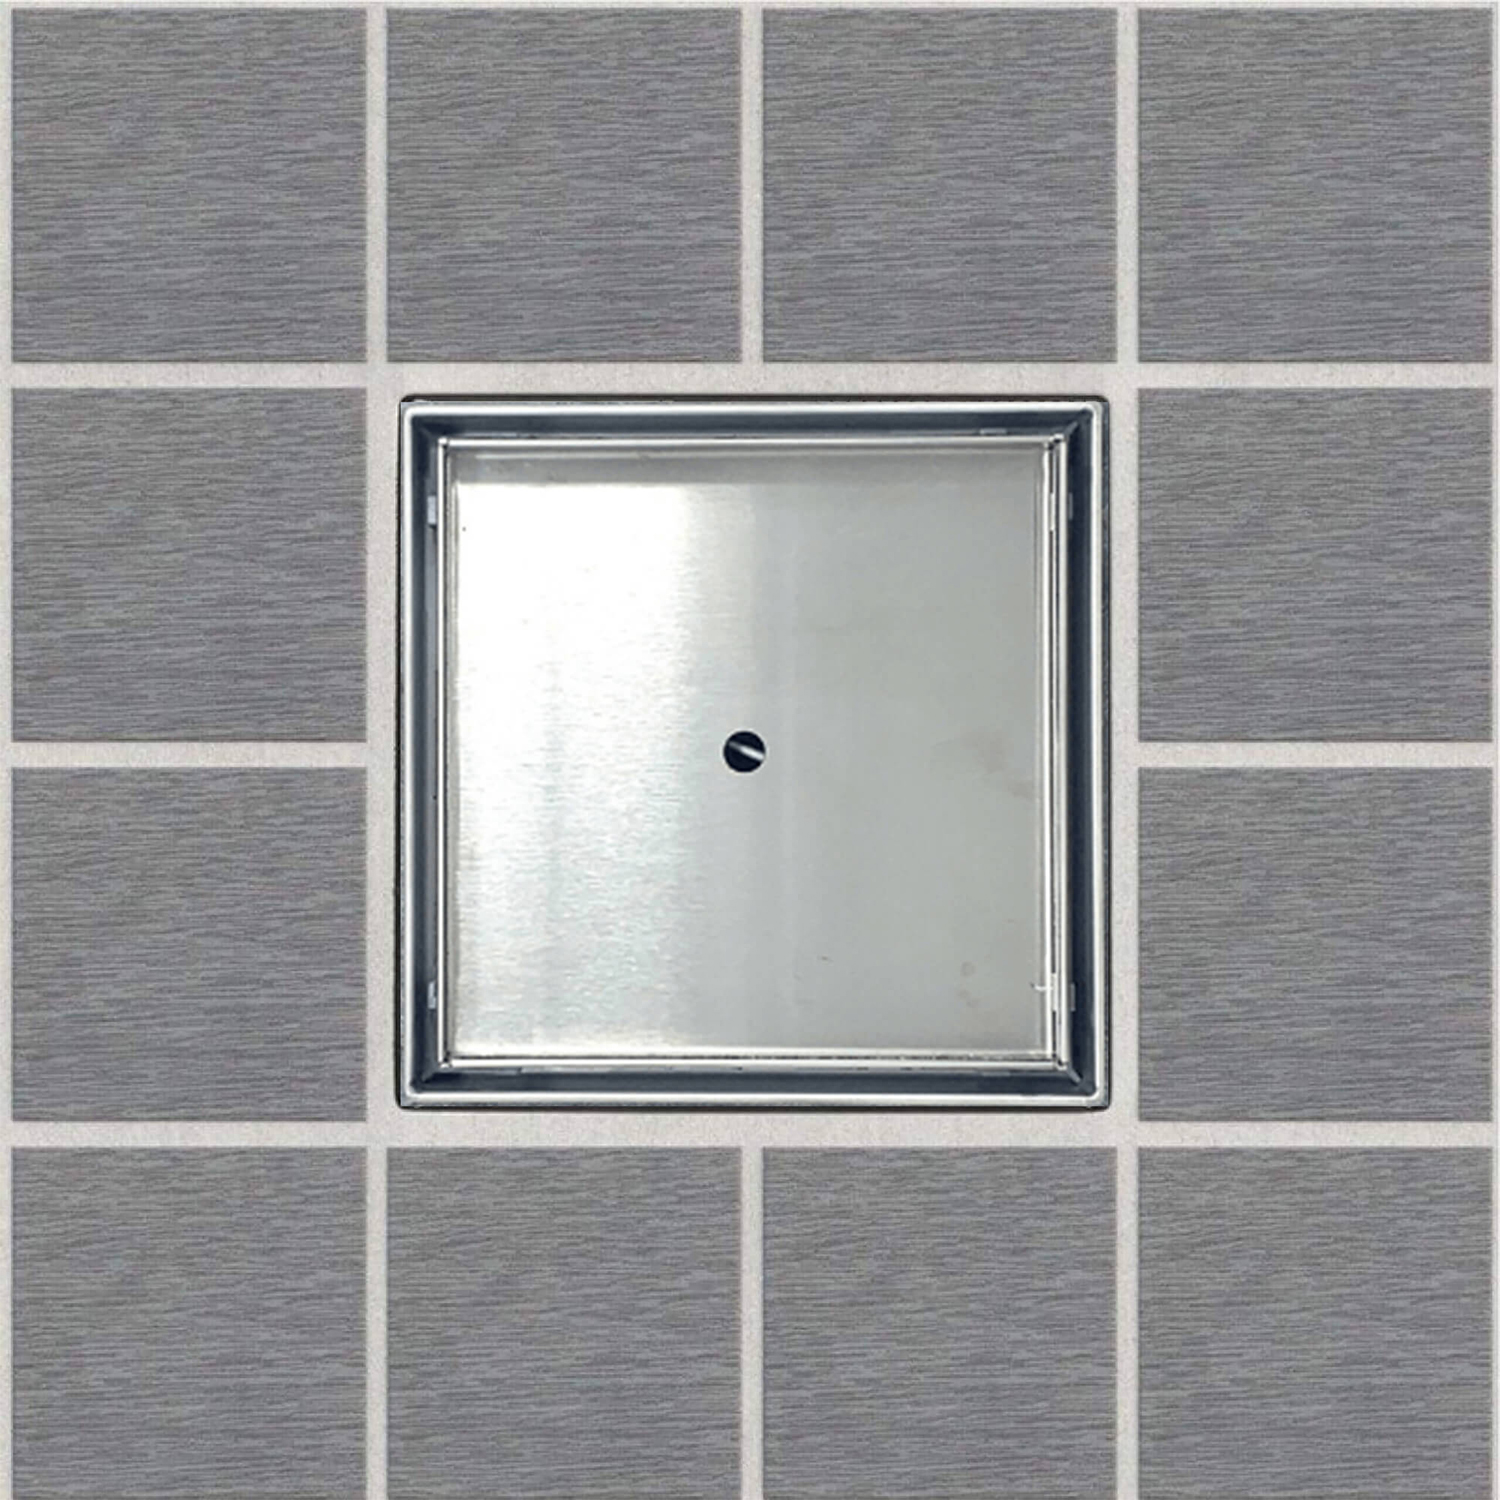 6 x 6 Square Drain with Blue Membrane - Tile-In - IB TOOLS